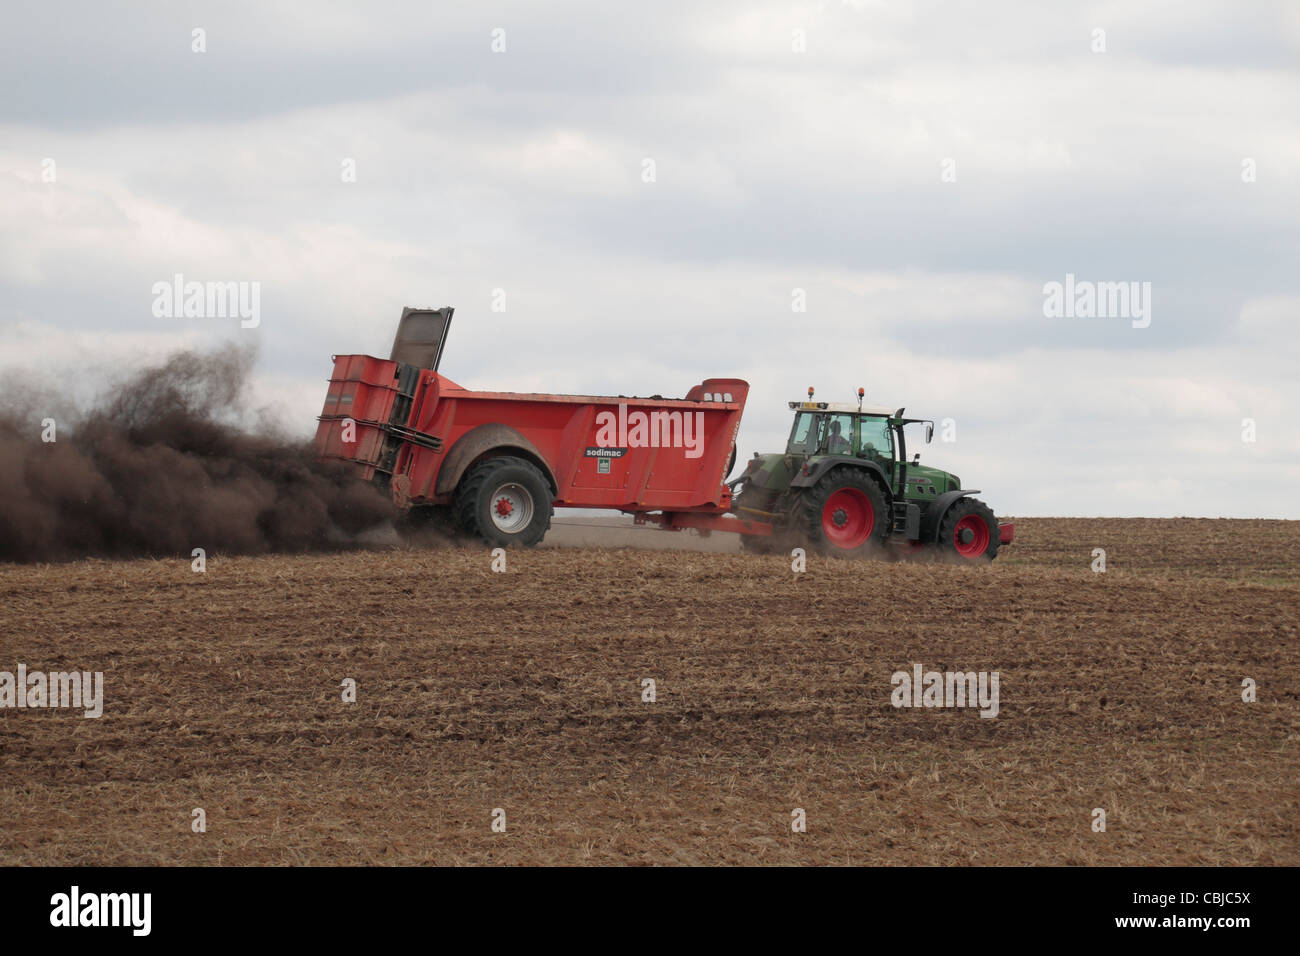 Tractor with Sodimac manure spreader (epandeur de fumier) spreading manure on an uncultivated field in northern France. Stock Photo